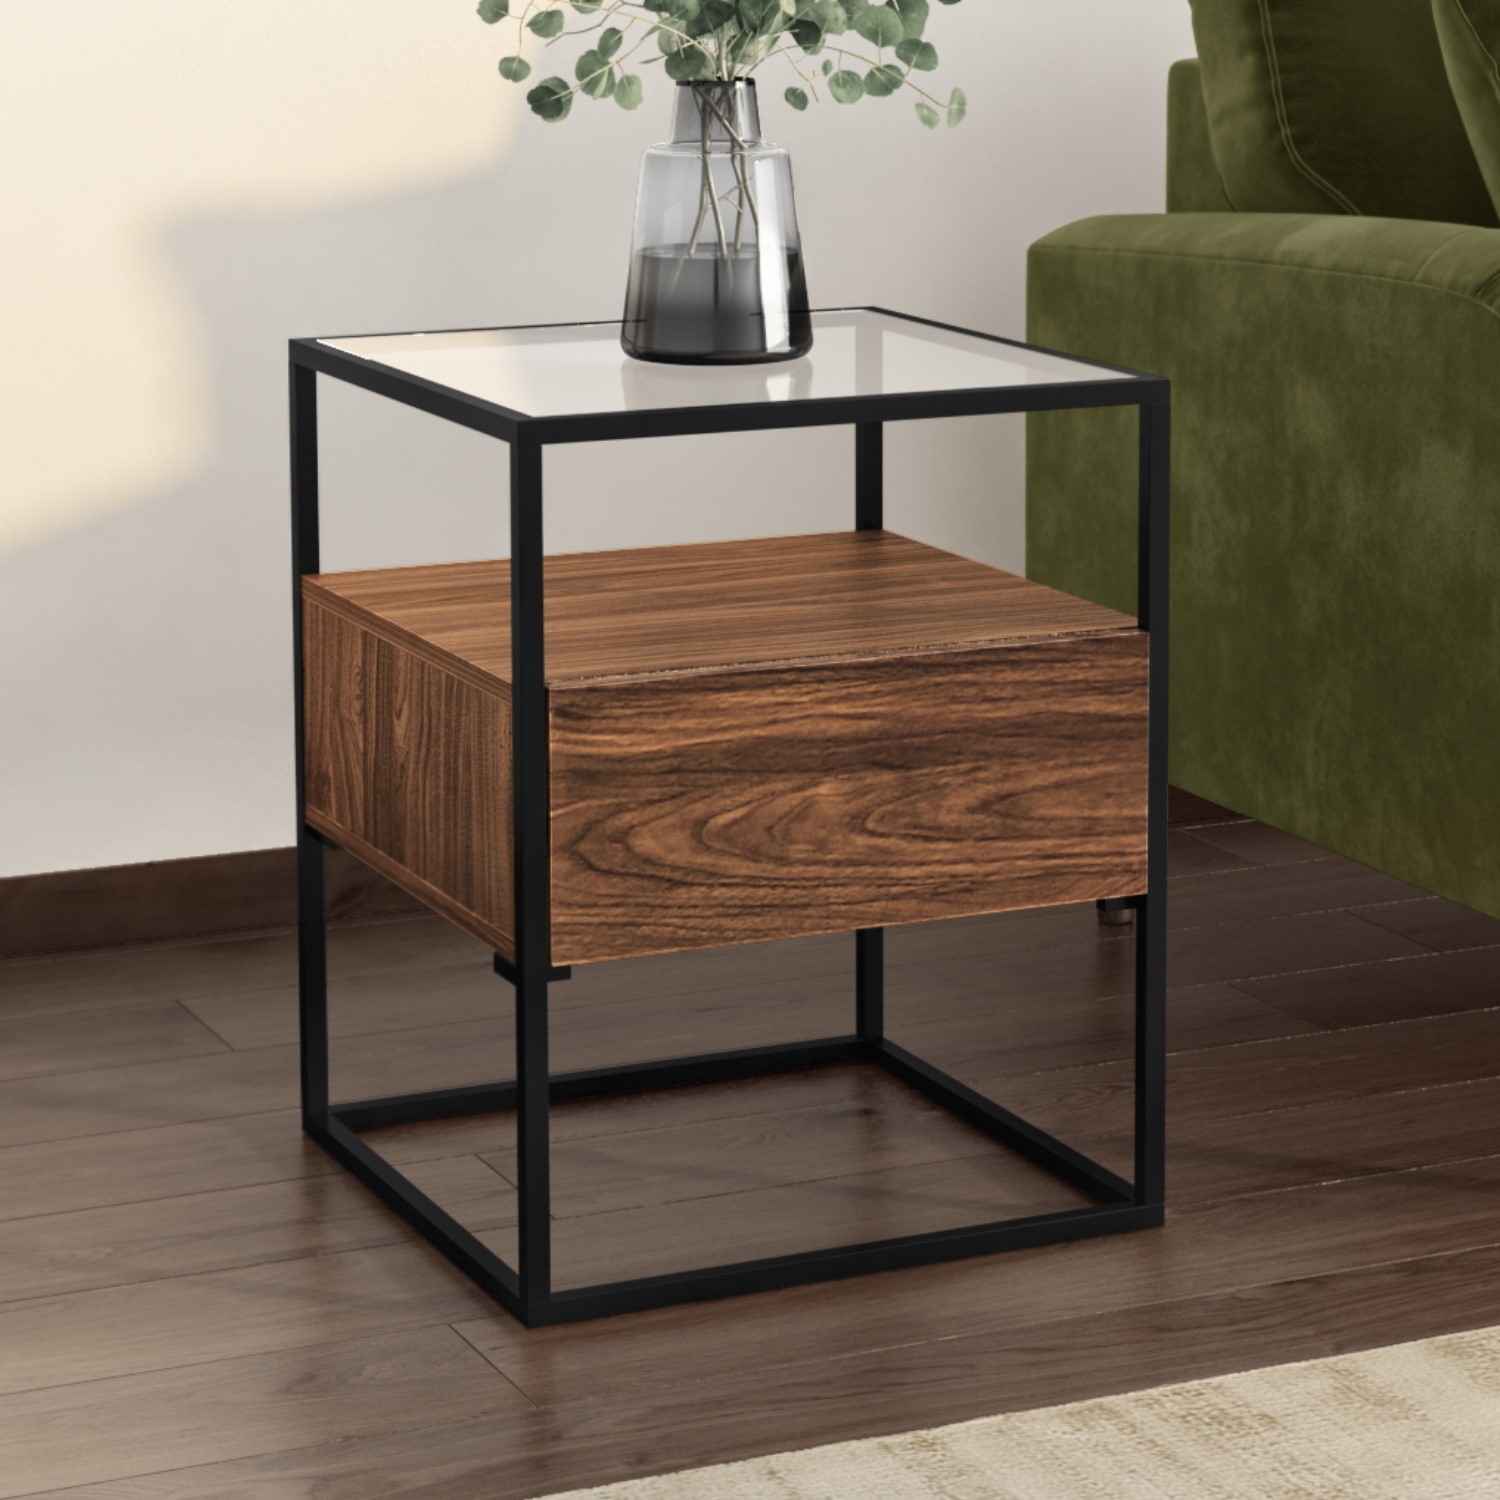 Photo of Walnut side table with glass top and storage drawer - akila